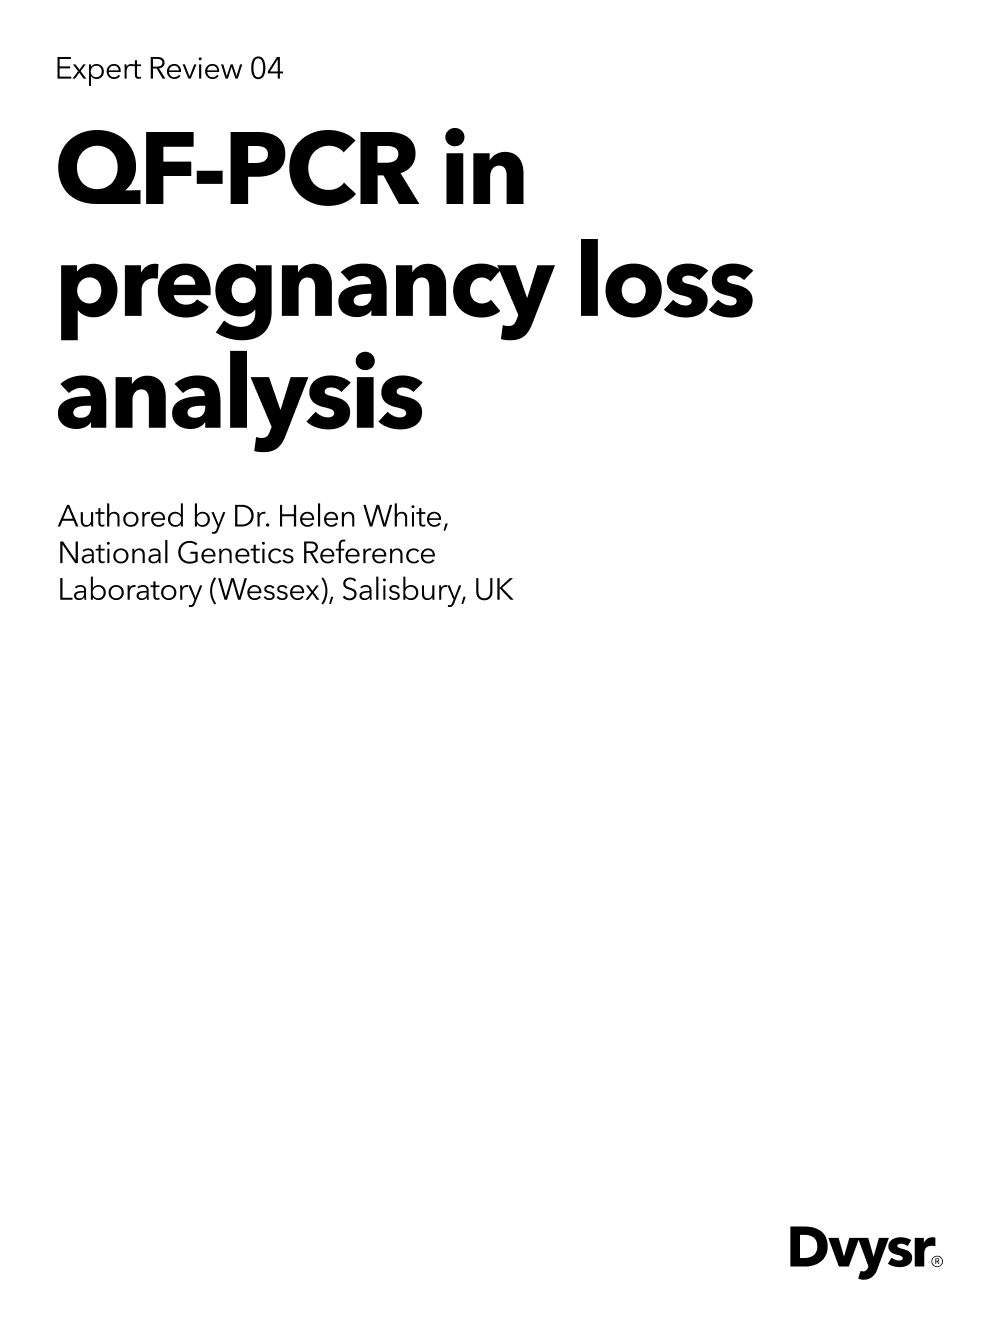 QF-PCR in pregnancy loss analysis